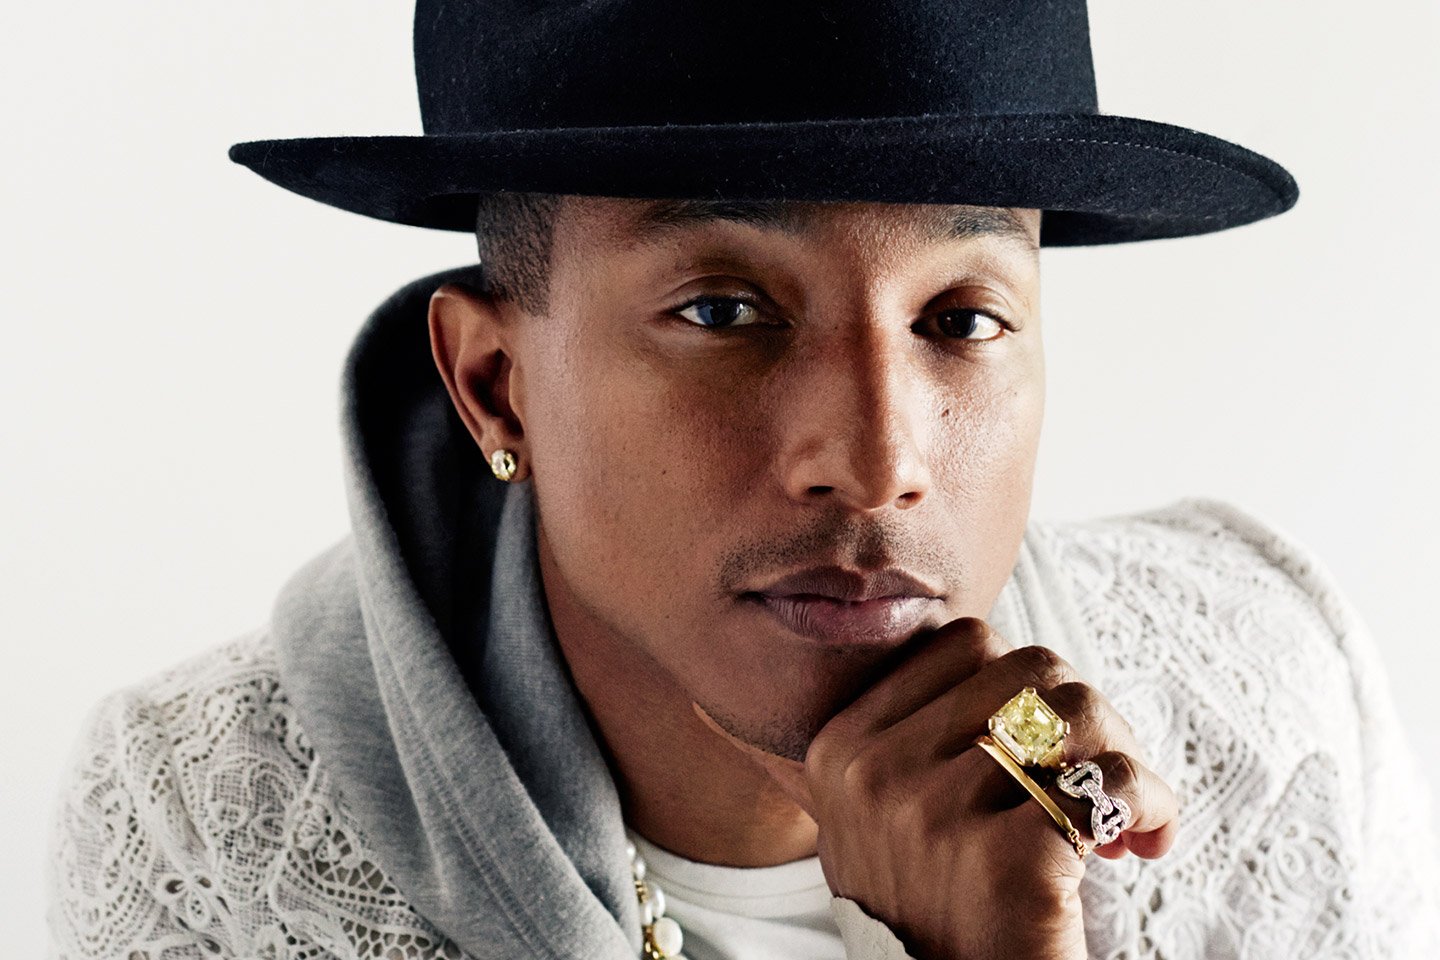  ON WITH Wishes:
Pharrell Williams A Happy Birthday! 